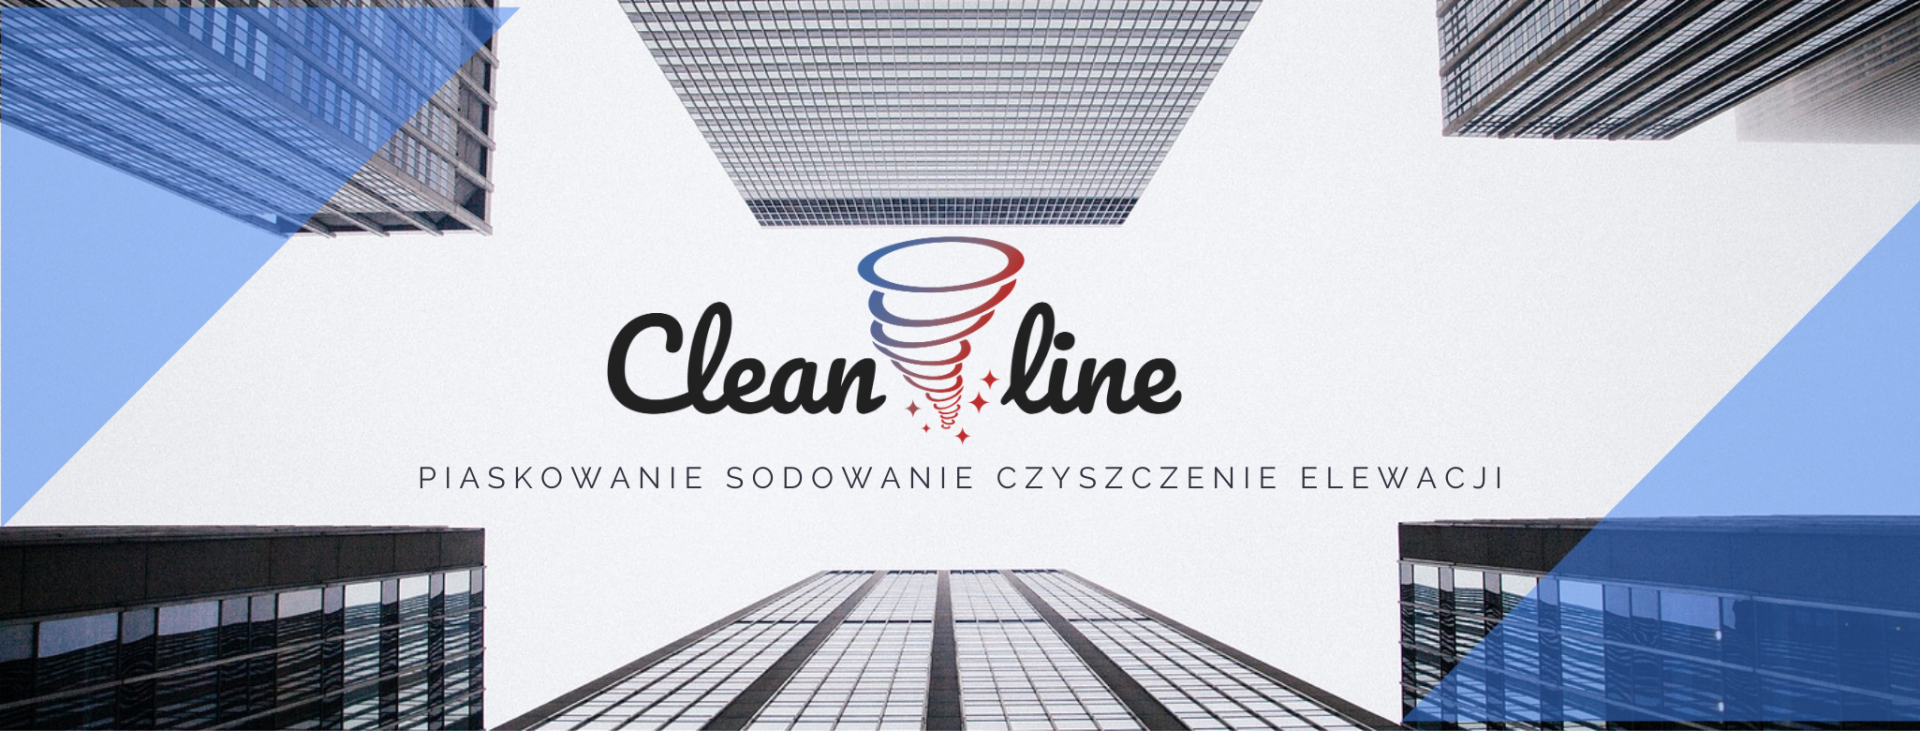 cleanline